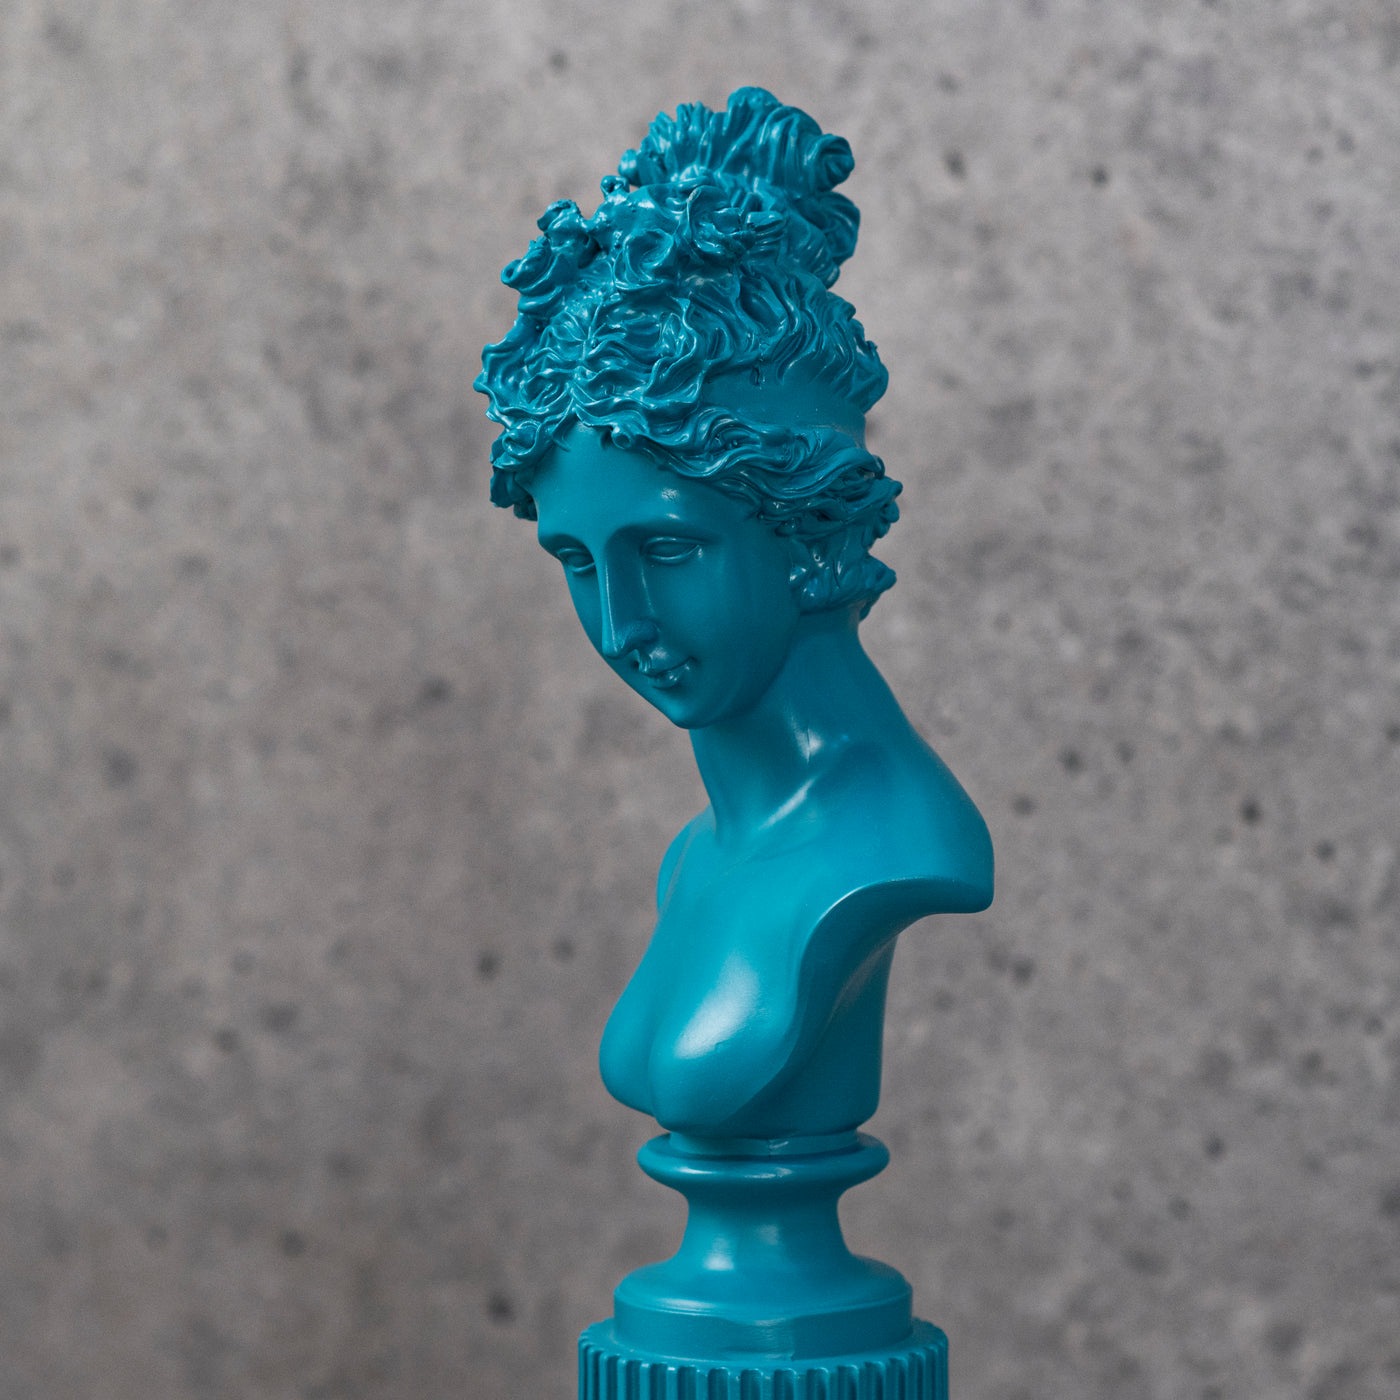 Teal lady statue by Home 360